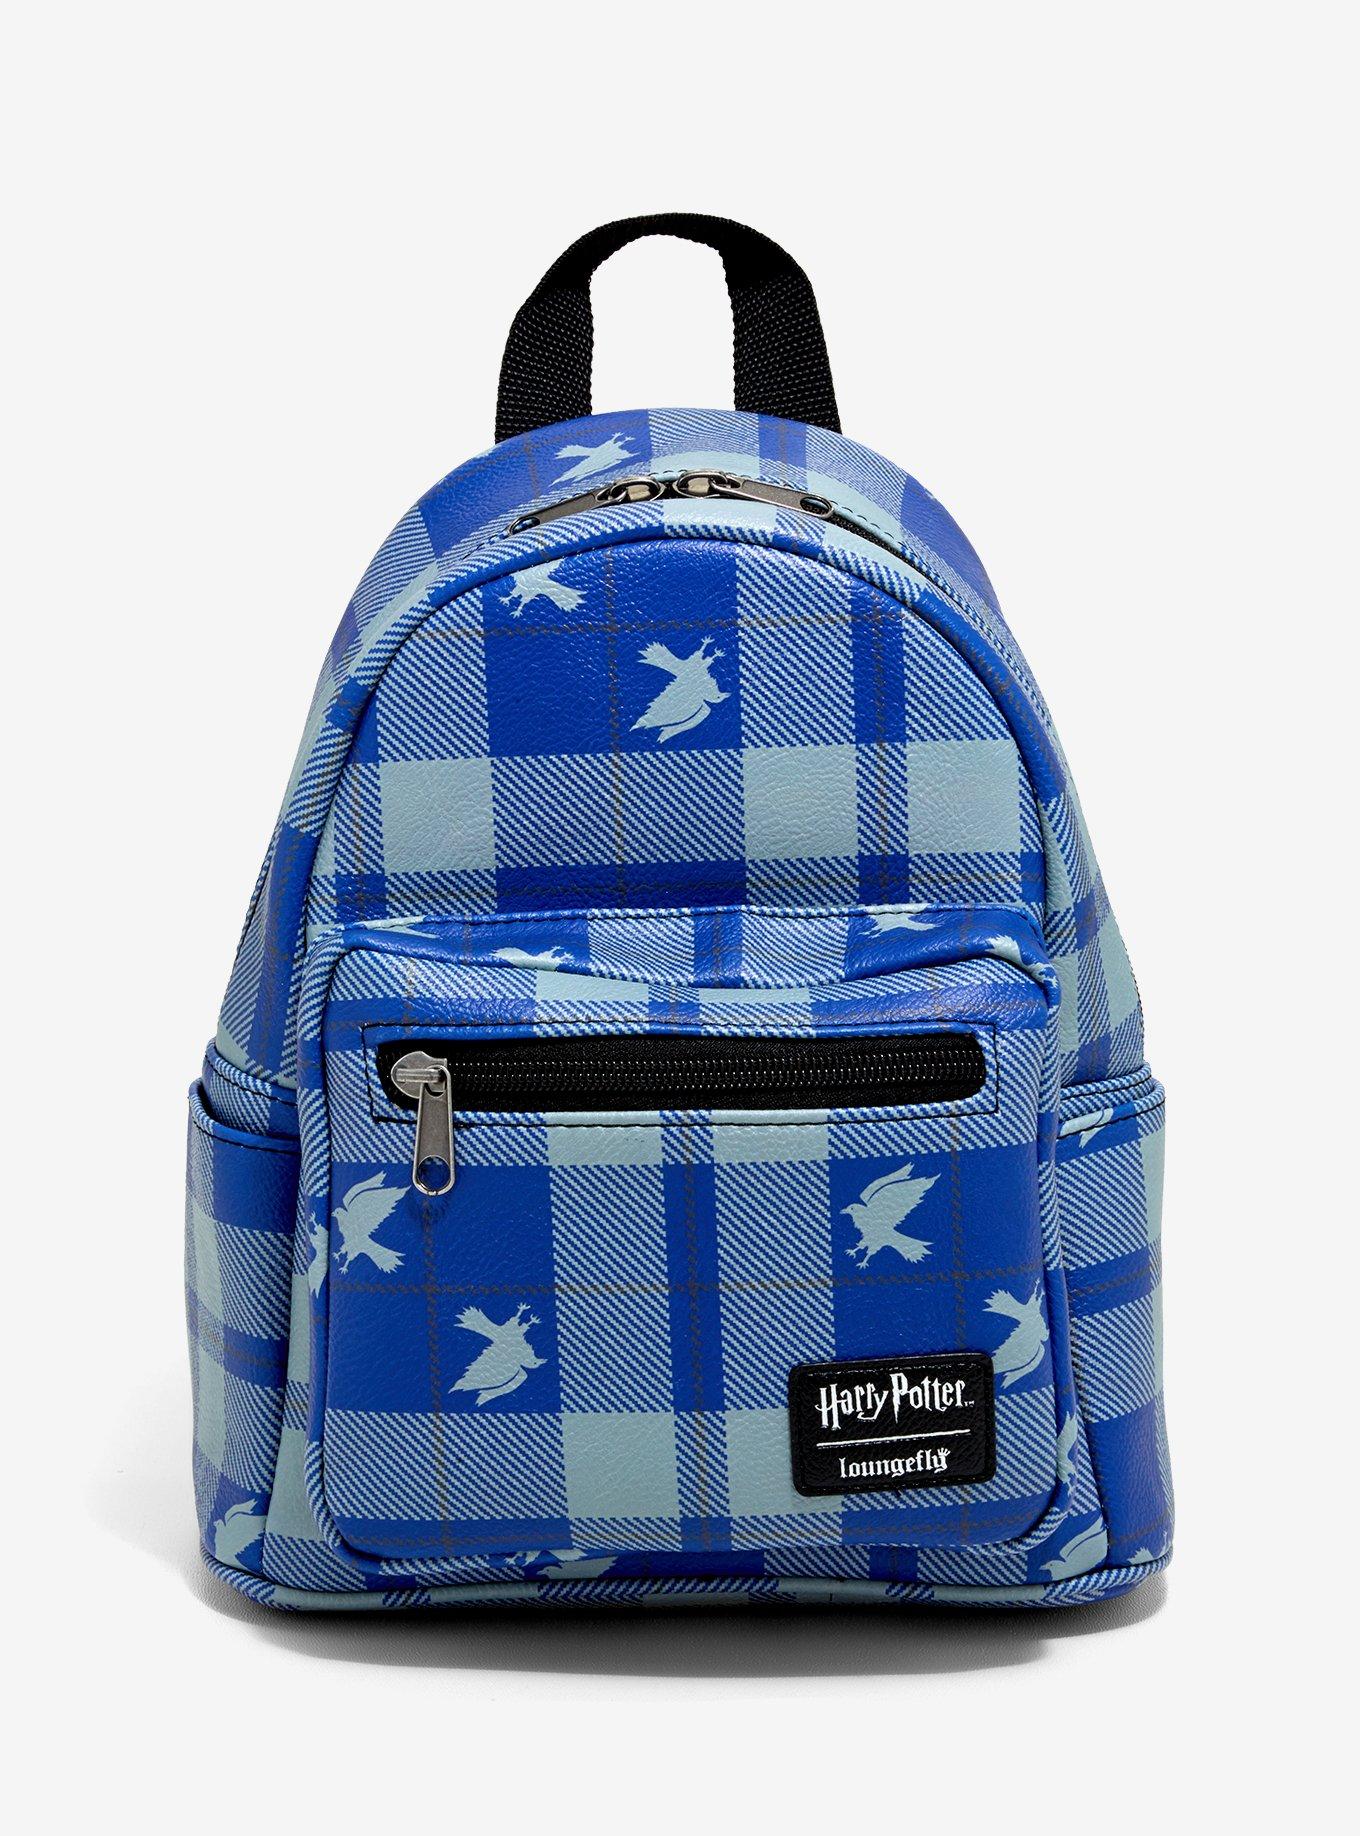 Loungefly Harry Potter Ravenclaw Plaid Mini Backpack, , hi-res